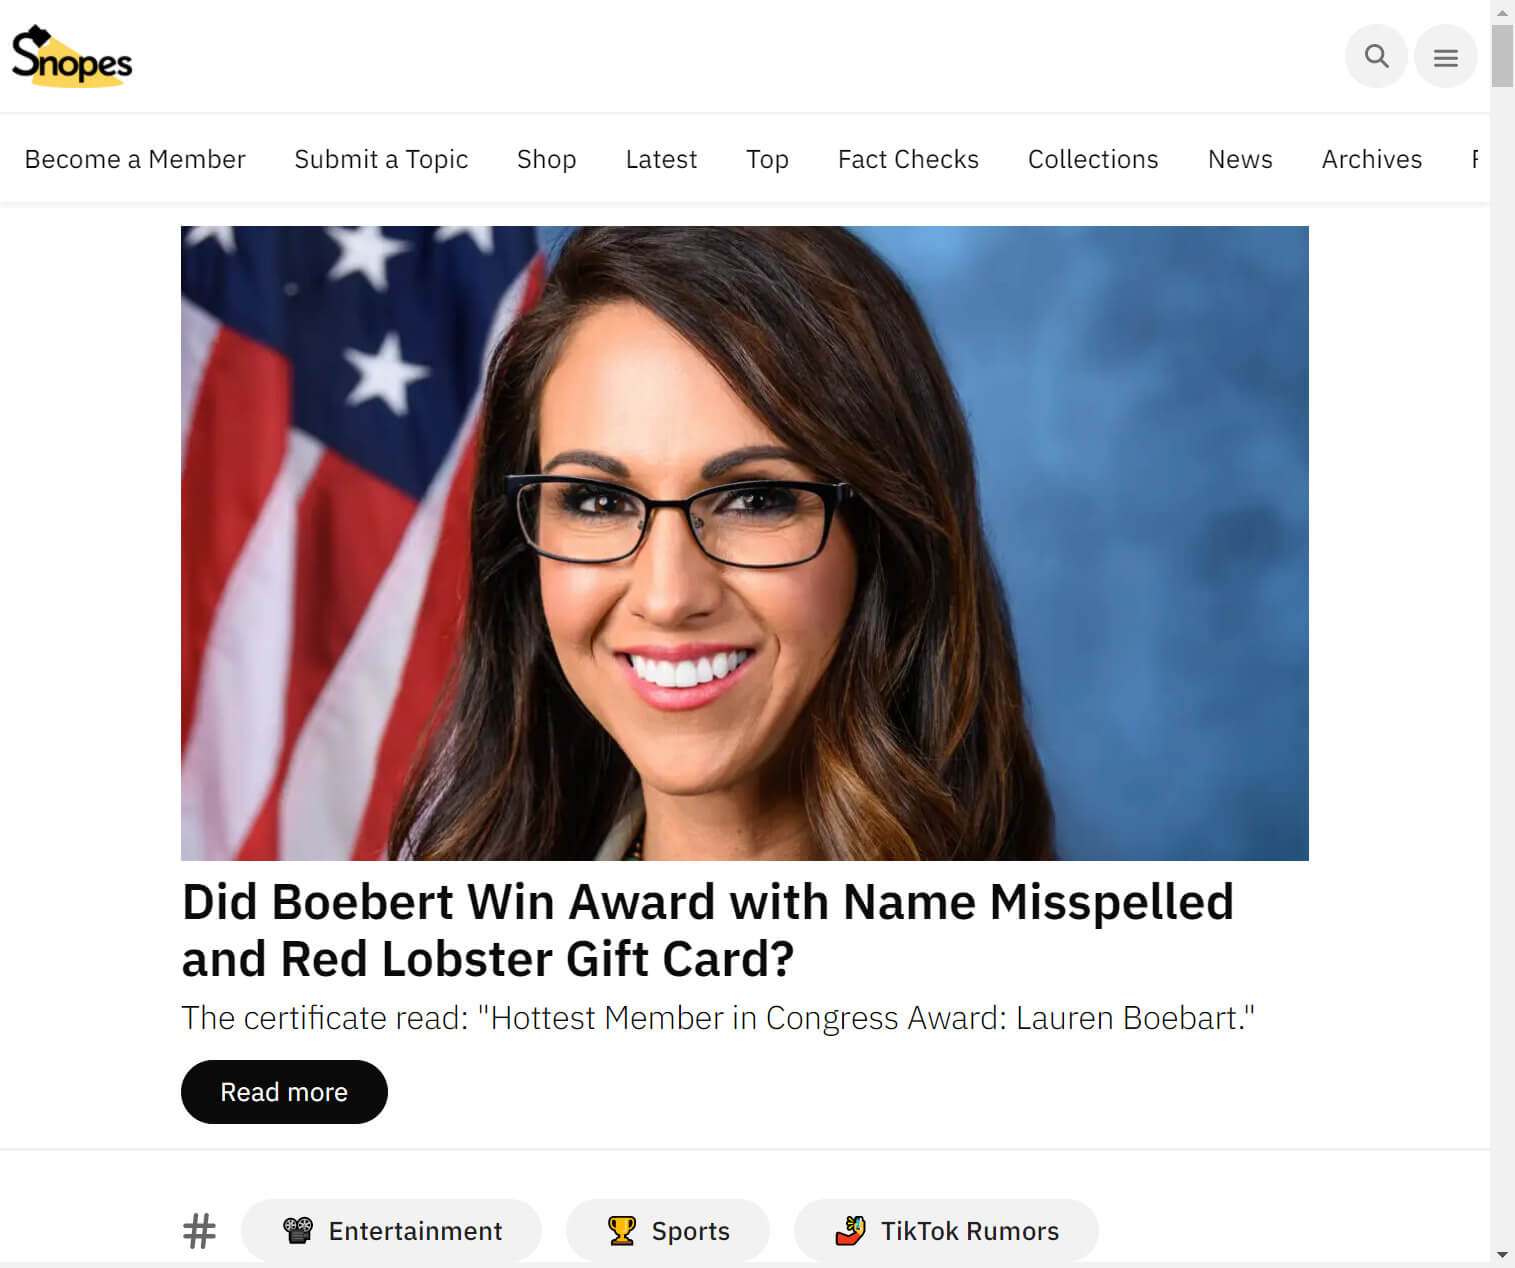 An image of the homepage of Snopes.com. It's still not a full page image.